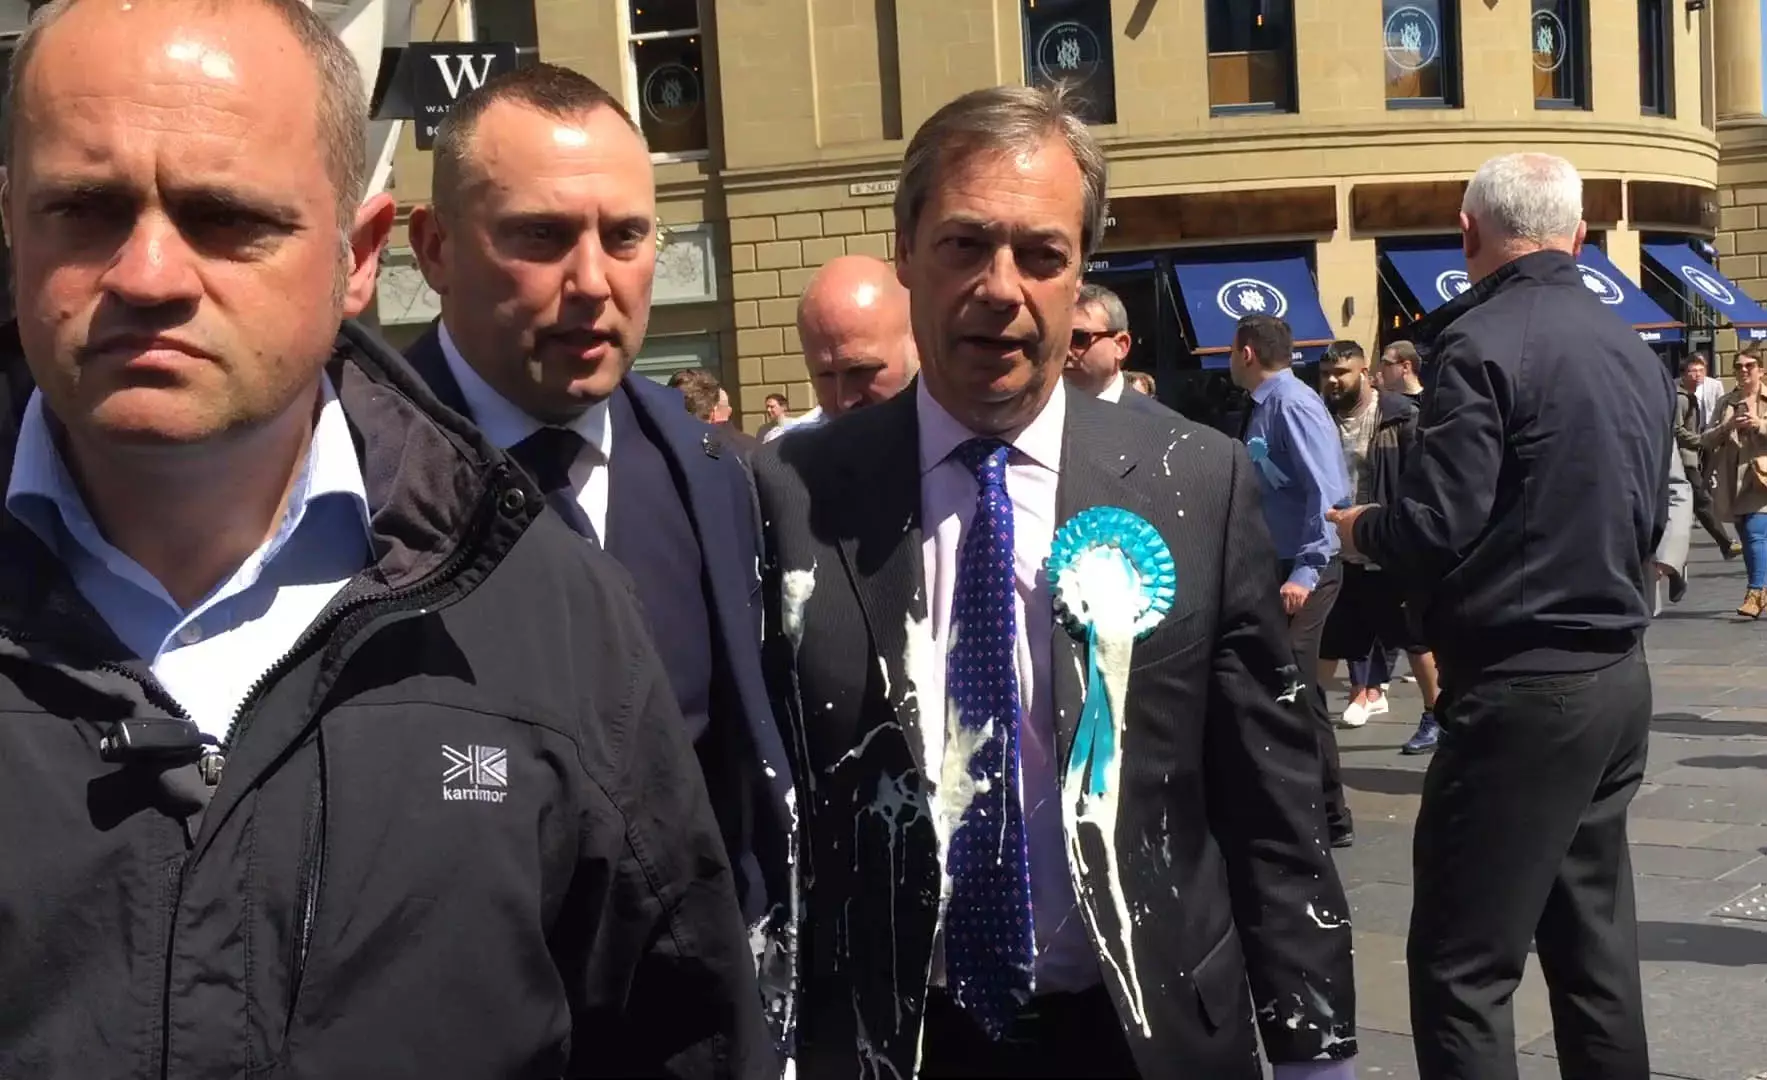 The Brexit Party leader was covered in milkshake by a protester in Newcastle.